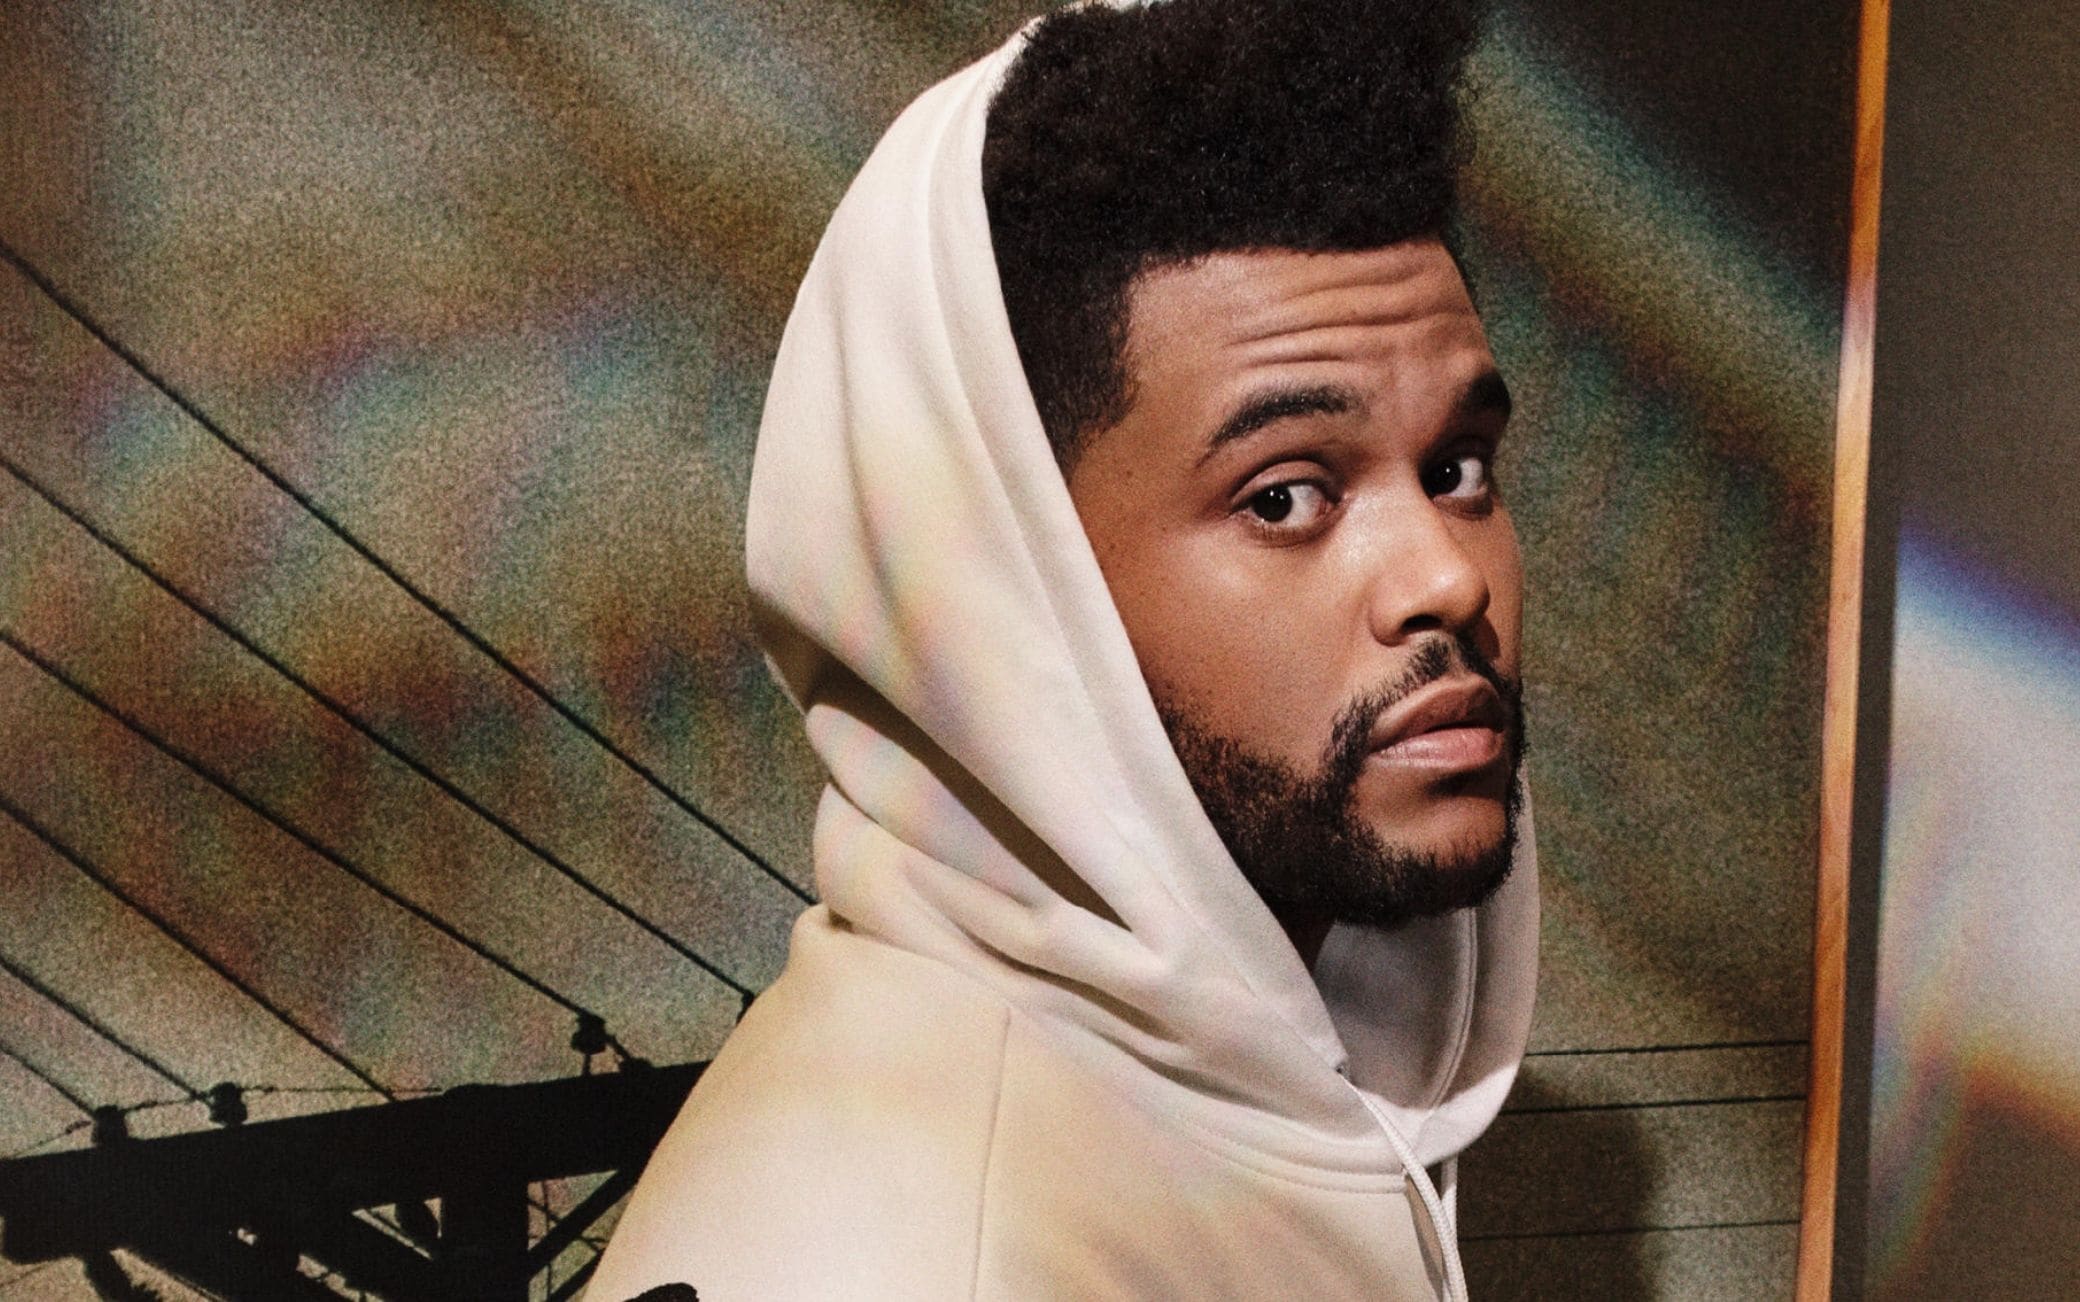 The Idol, HBO will produce the first tv series of The Weeknd